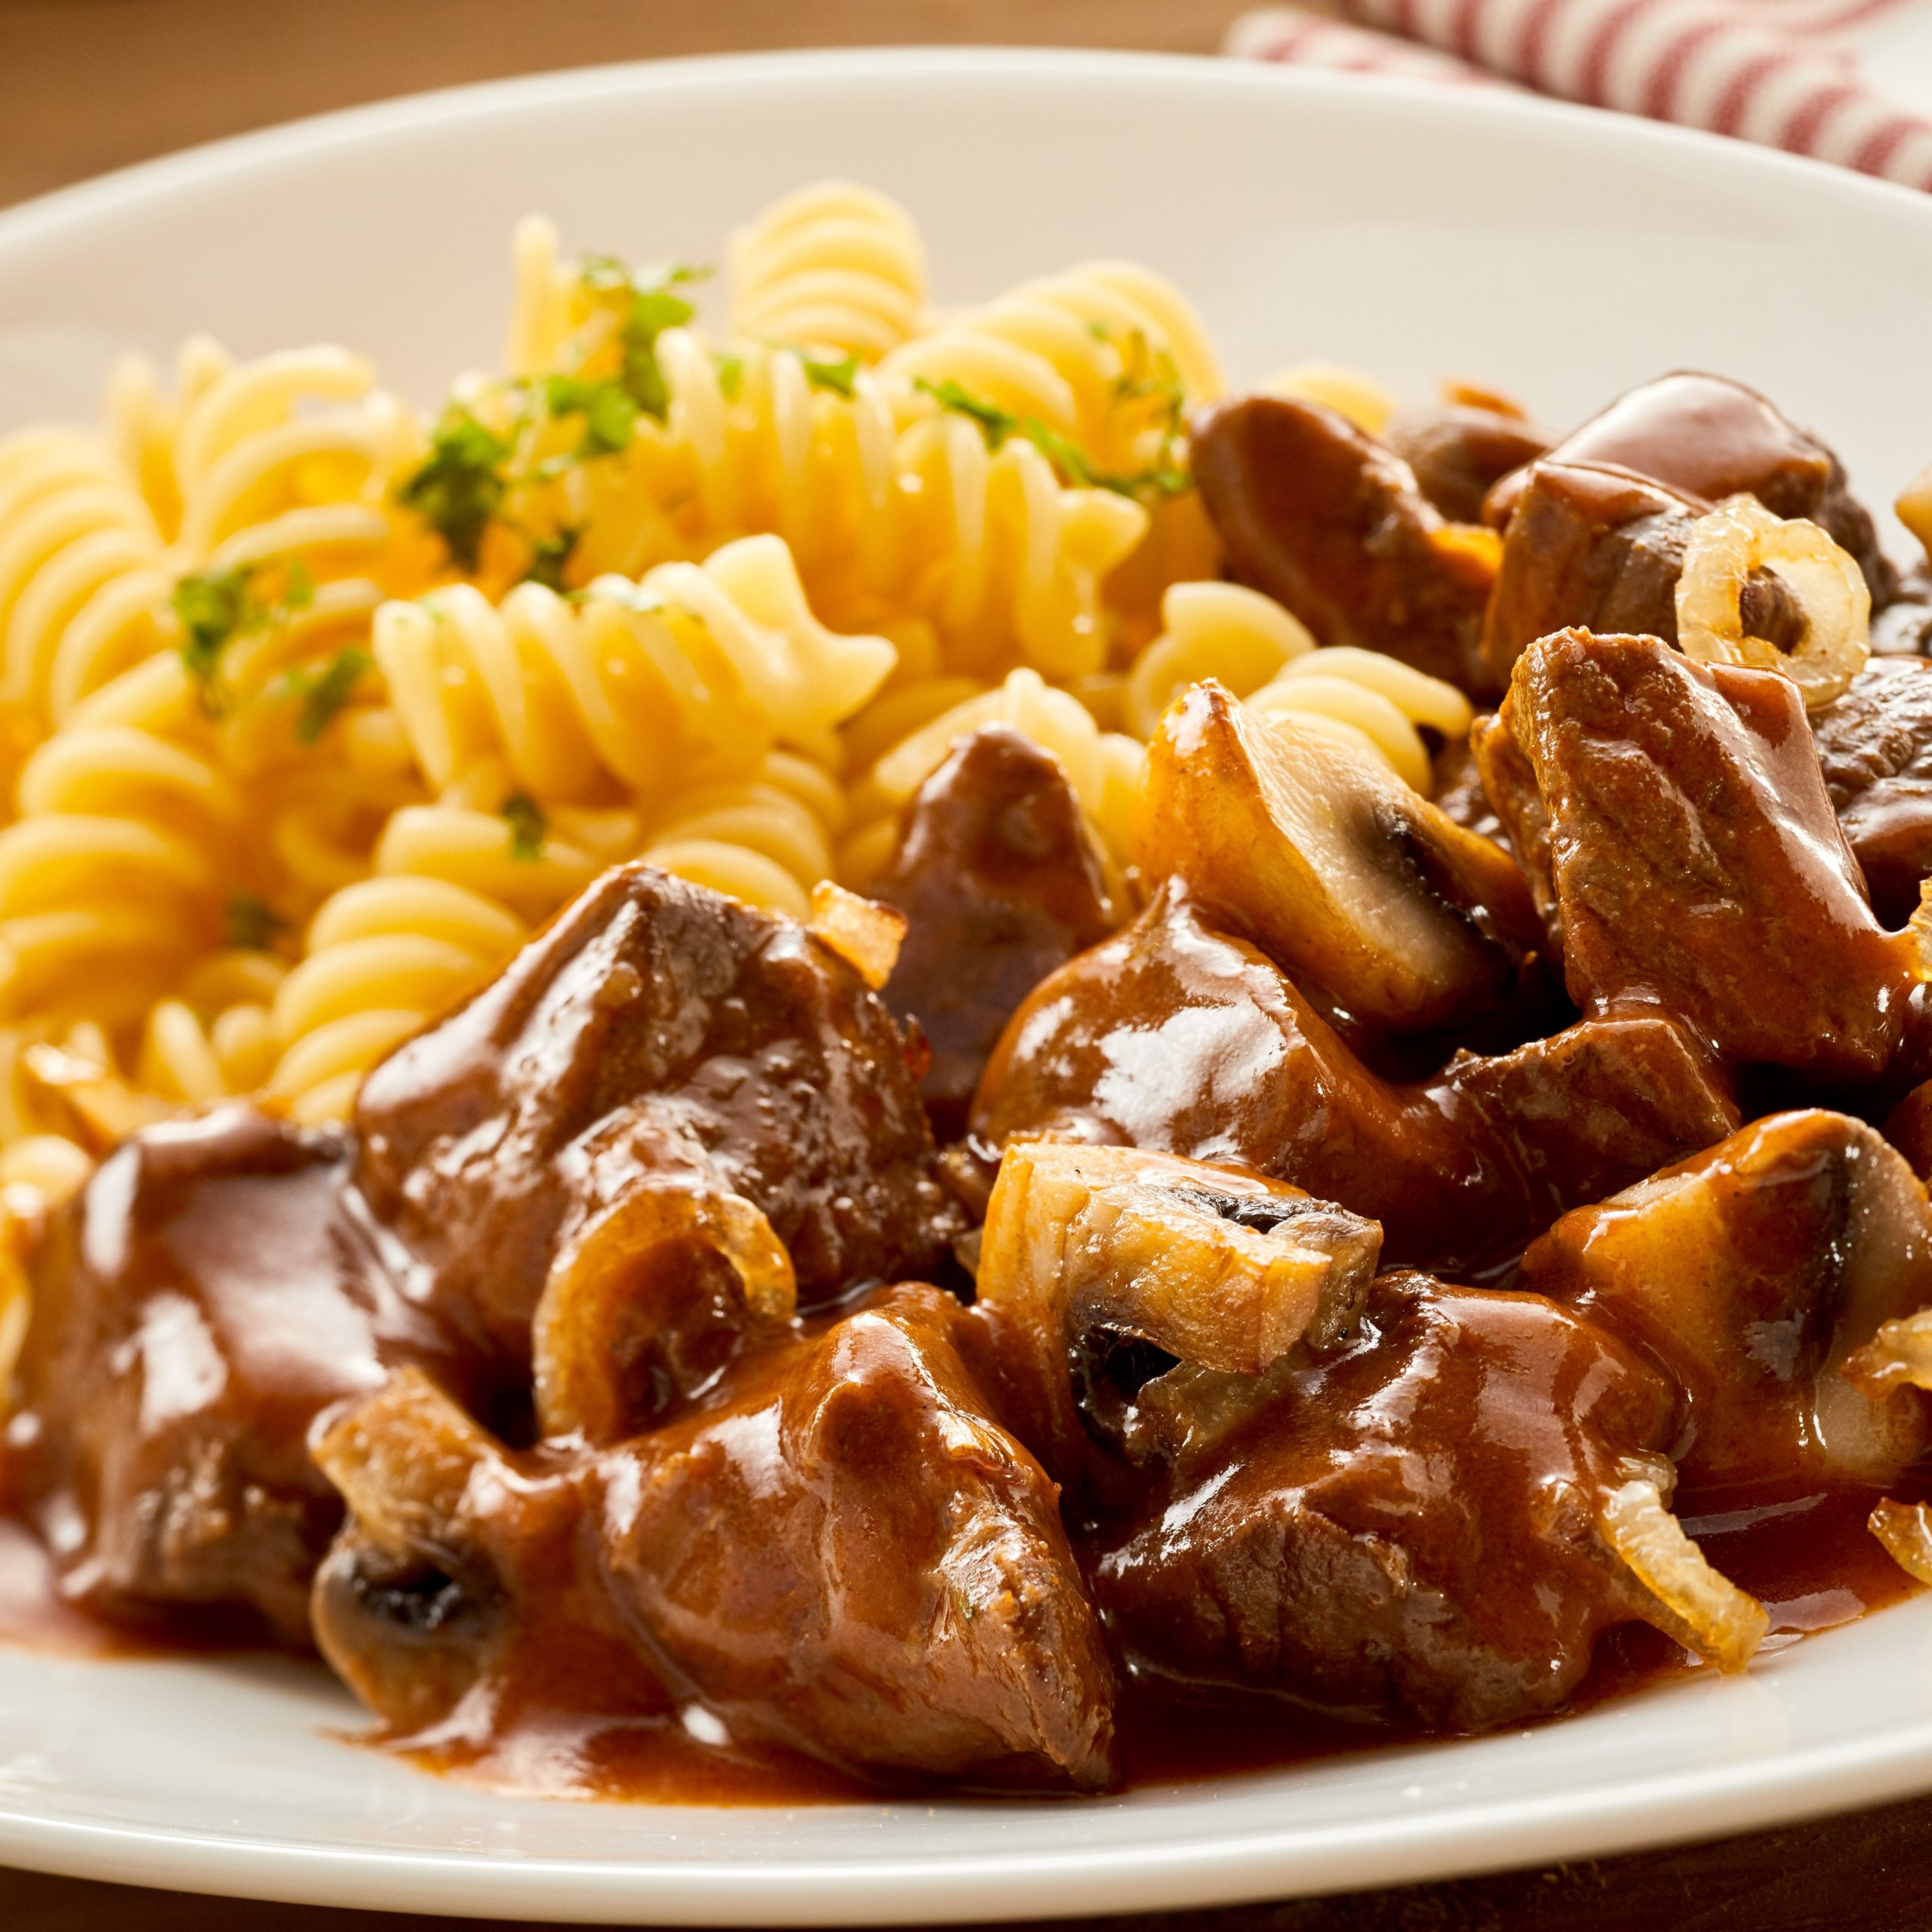 Elevated view of freshly made Hungarian goulash with garnished pasta on plate